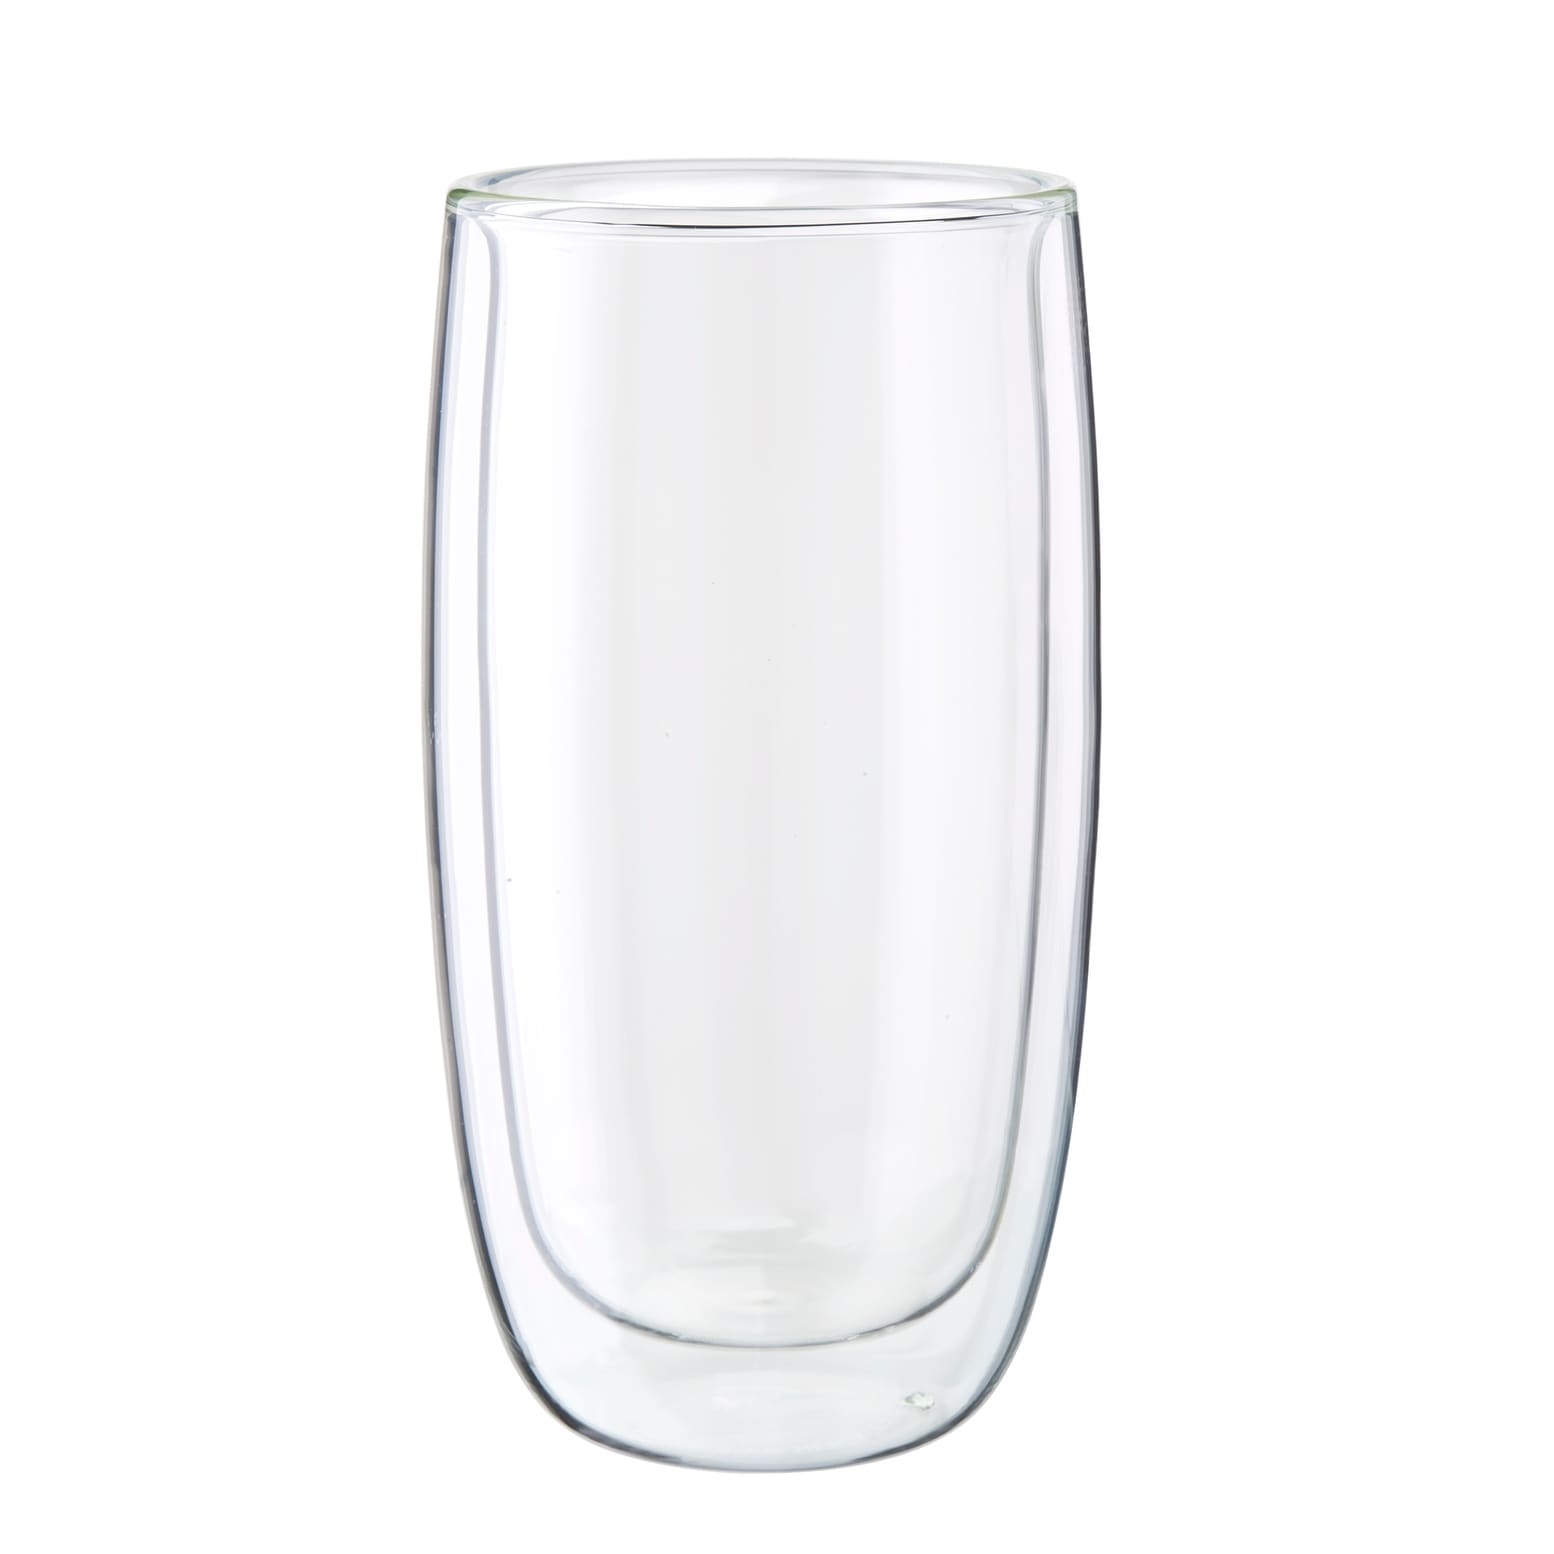 https://ak1.ostkcdn.com/images/products/is/images/direct/8b9c5e12db94d017813f3c9d09f52aed47cd7028/ZWILLING-Sorrento-2-pc-Beverage-Glass-Set.jpg